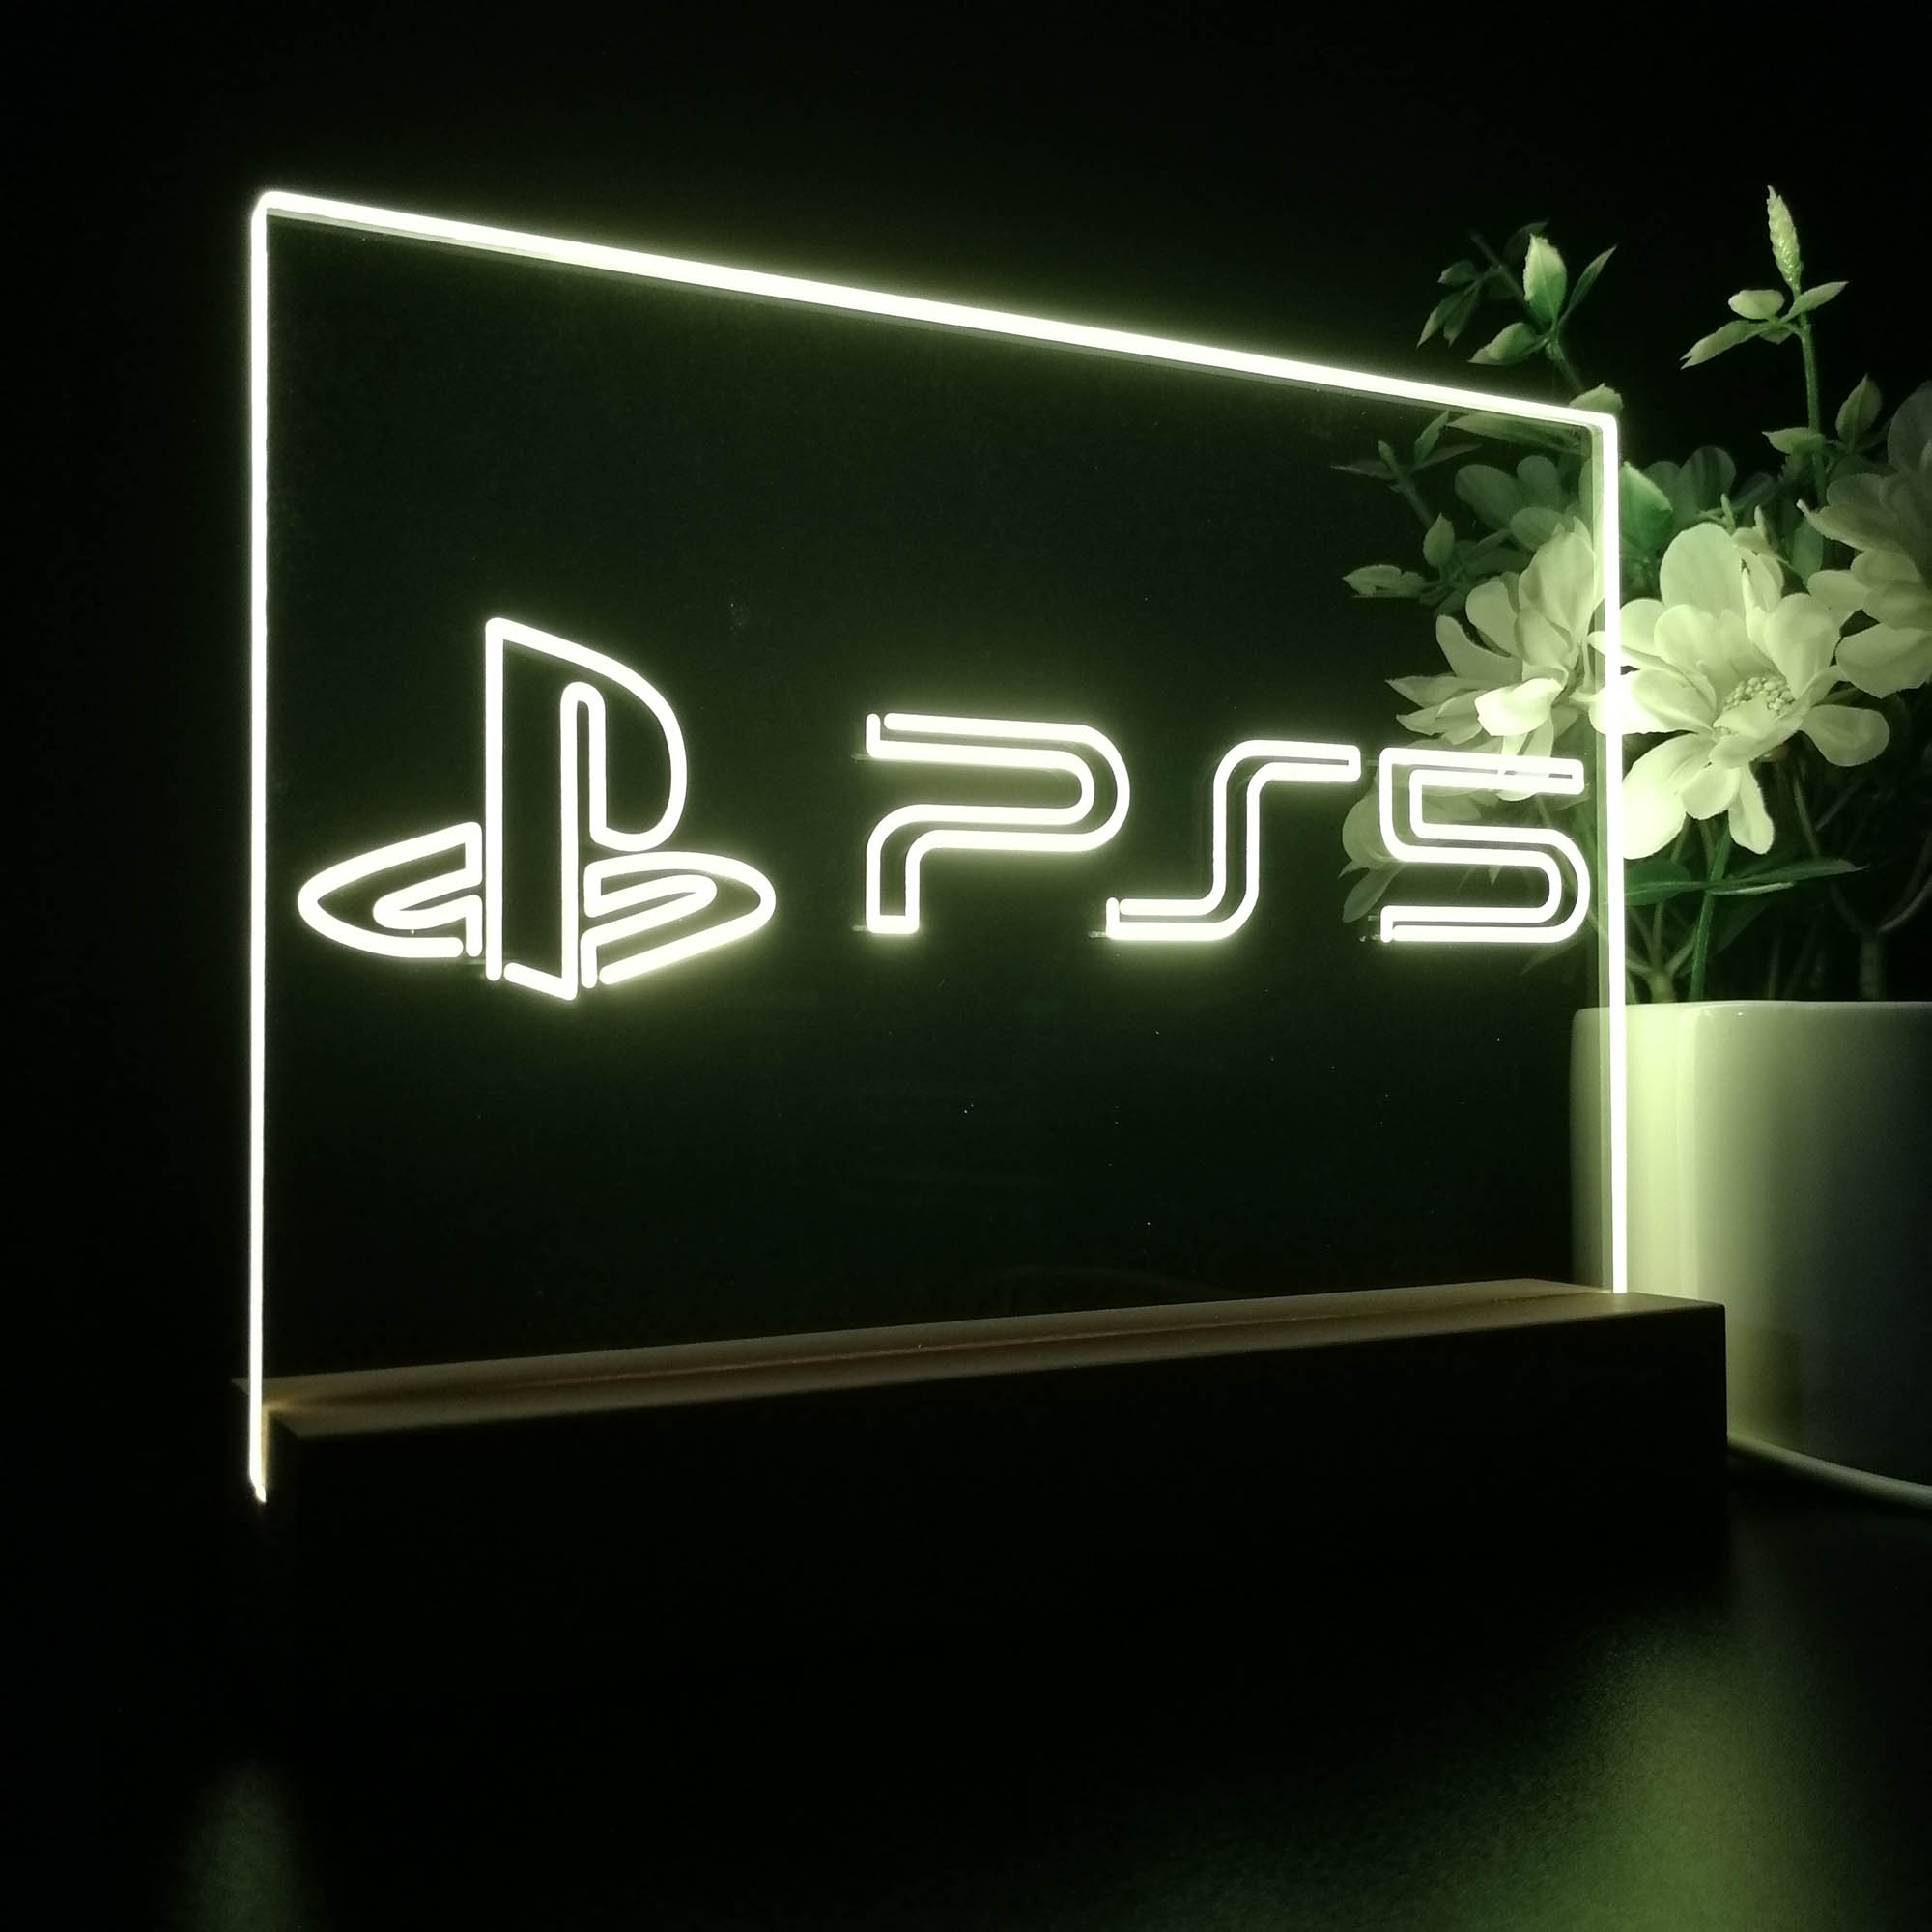 Playstation 5 Game Room Man Cave Kids Gift Neon Sign Lamp